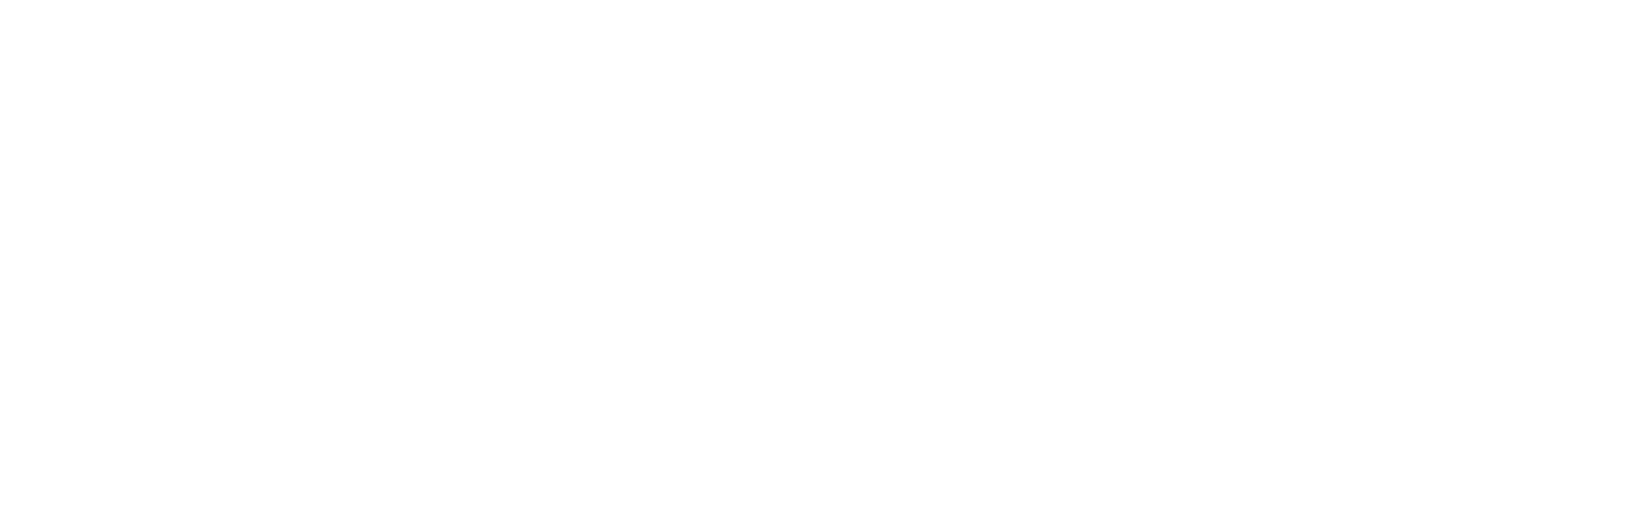 White graphic that reads, "The Pointe at Meridian, a Grace Management Community."